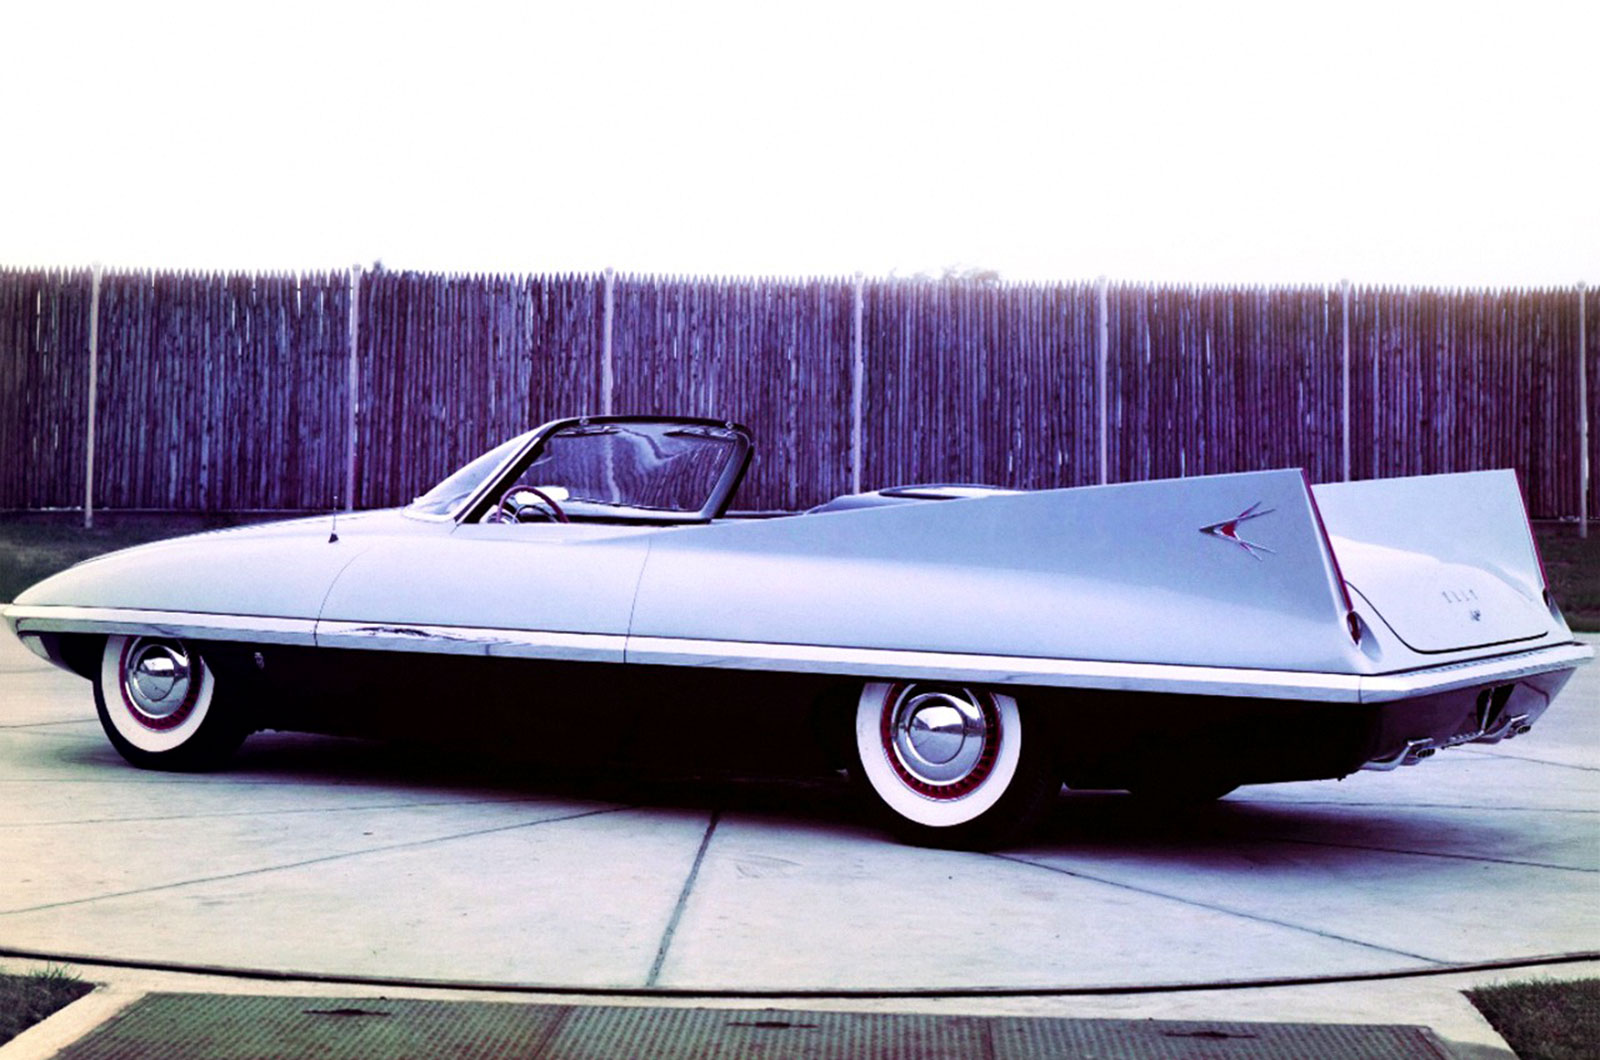 <p>Created in the wind tunnel, the Dodge Dart was the world's most aerodynamic car when it was unveiled in 1956. Dodge claimed that the Dart had less than one third of the drag of the most aerodynamic production cars of the time. Capable of seating four, the Dart's steel roof could be kept in place or retracted into a concealed compartment behind the rear seat.</p>